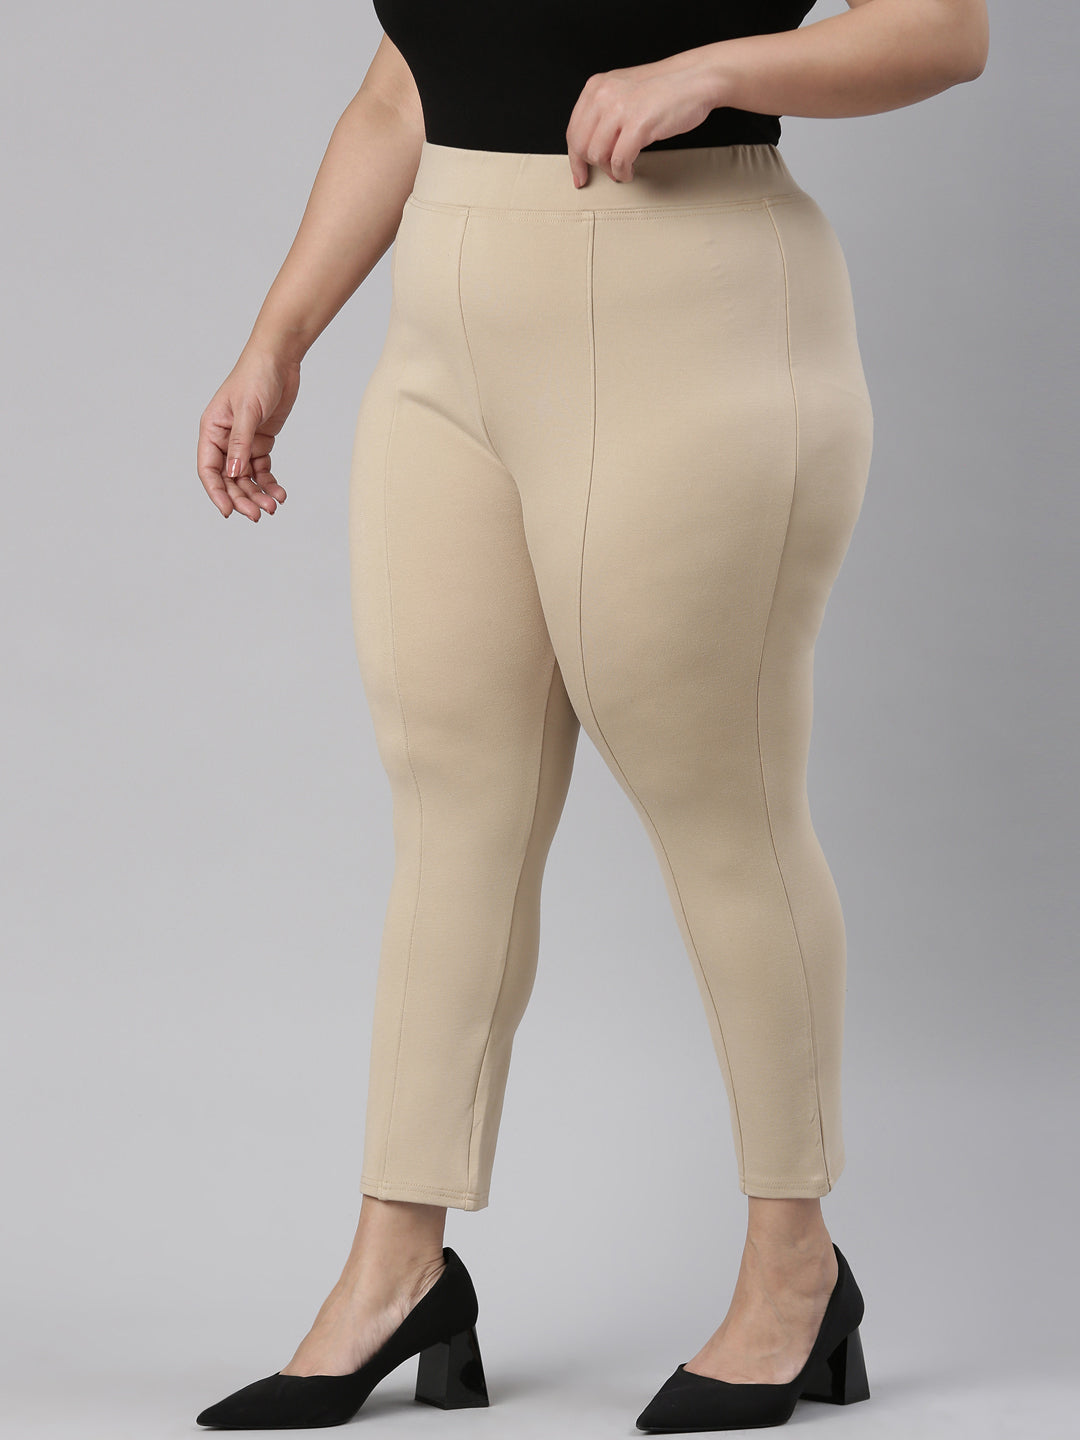 Find more than just plus size pants for women at Pink Moon – The Pink Moon